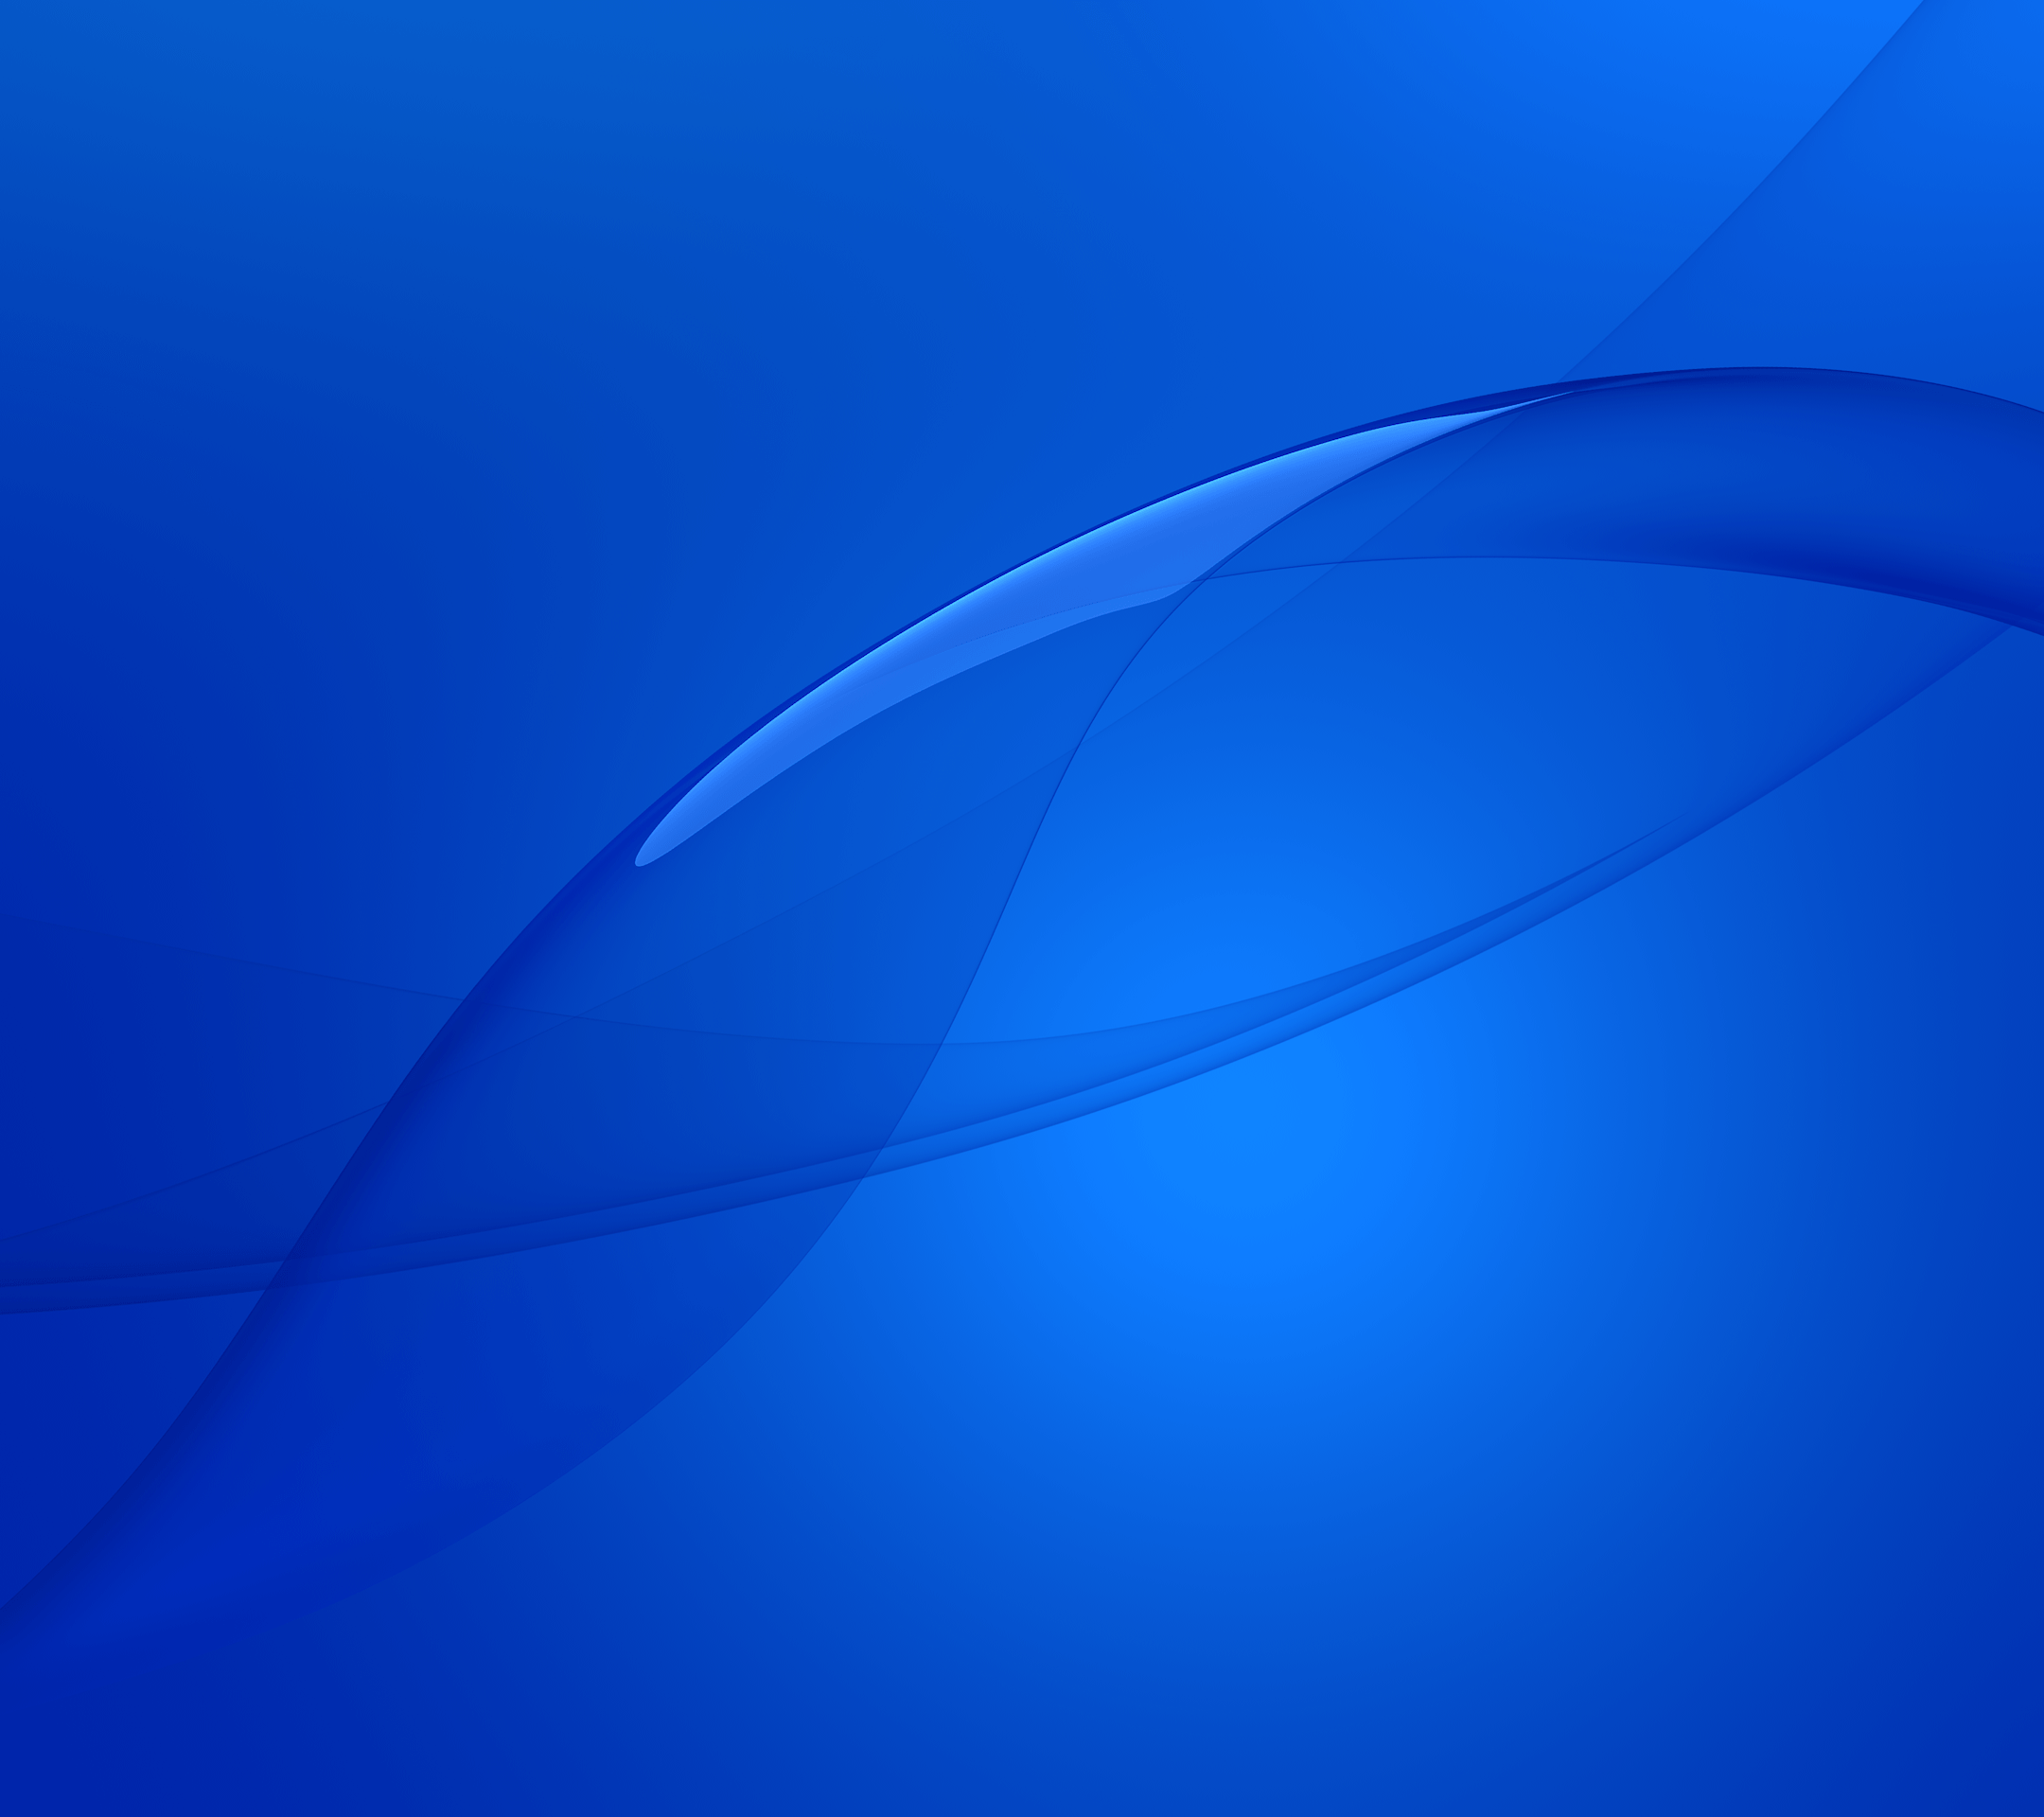 Sony Xperia Z3 wallpaper available for download. TalkAndroid.com